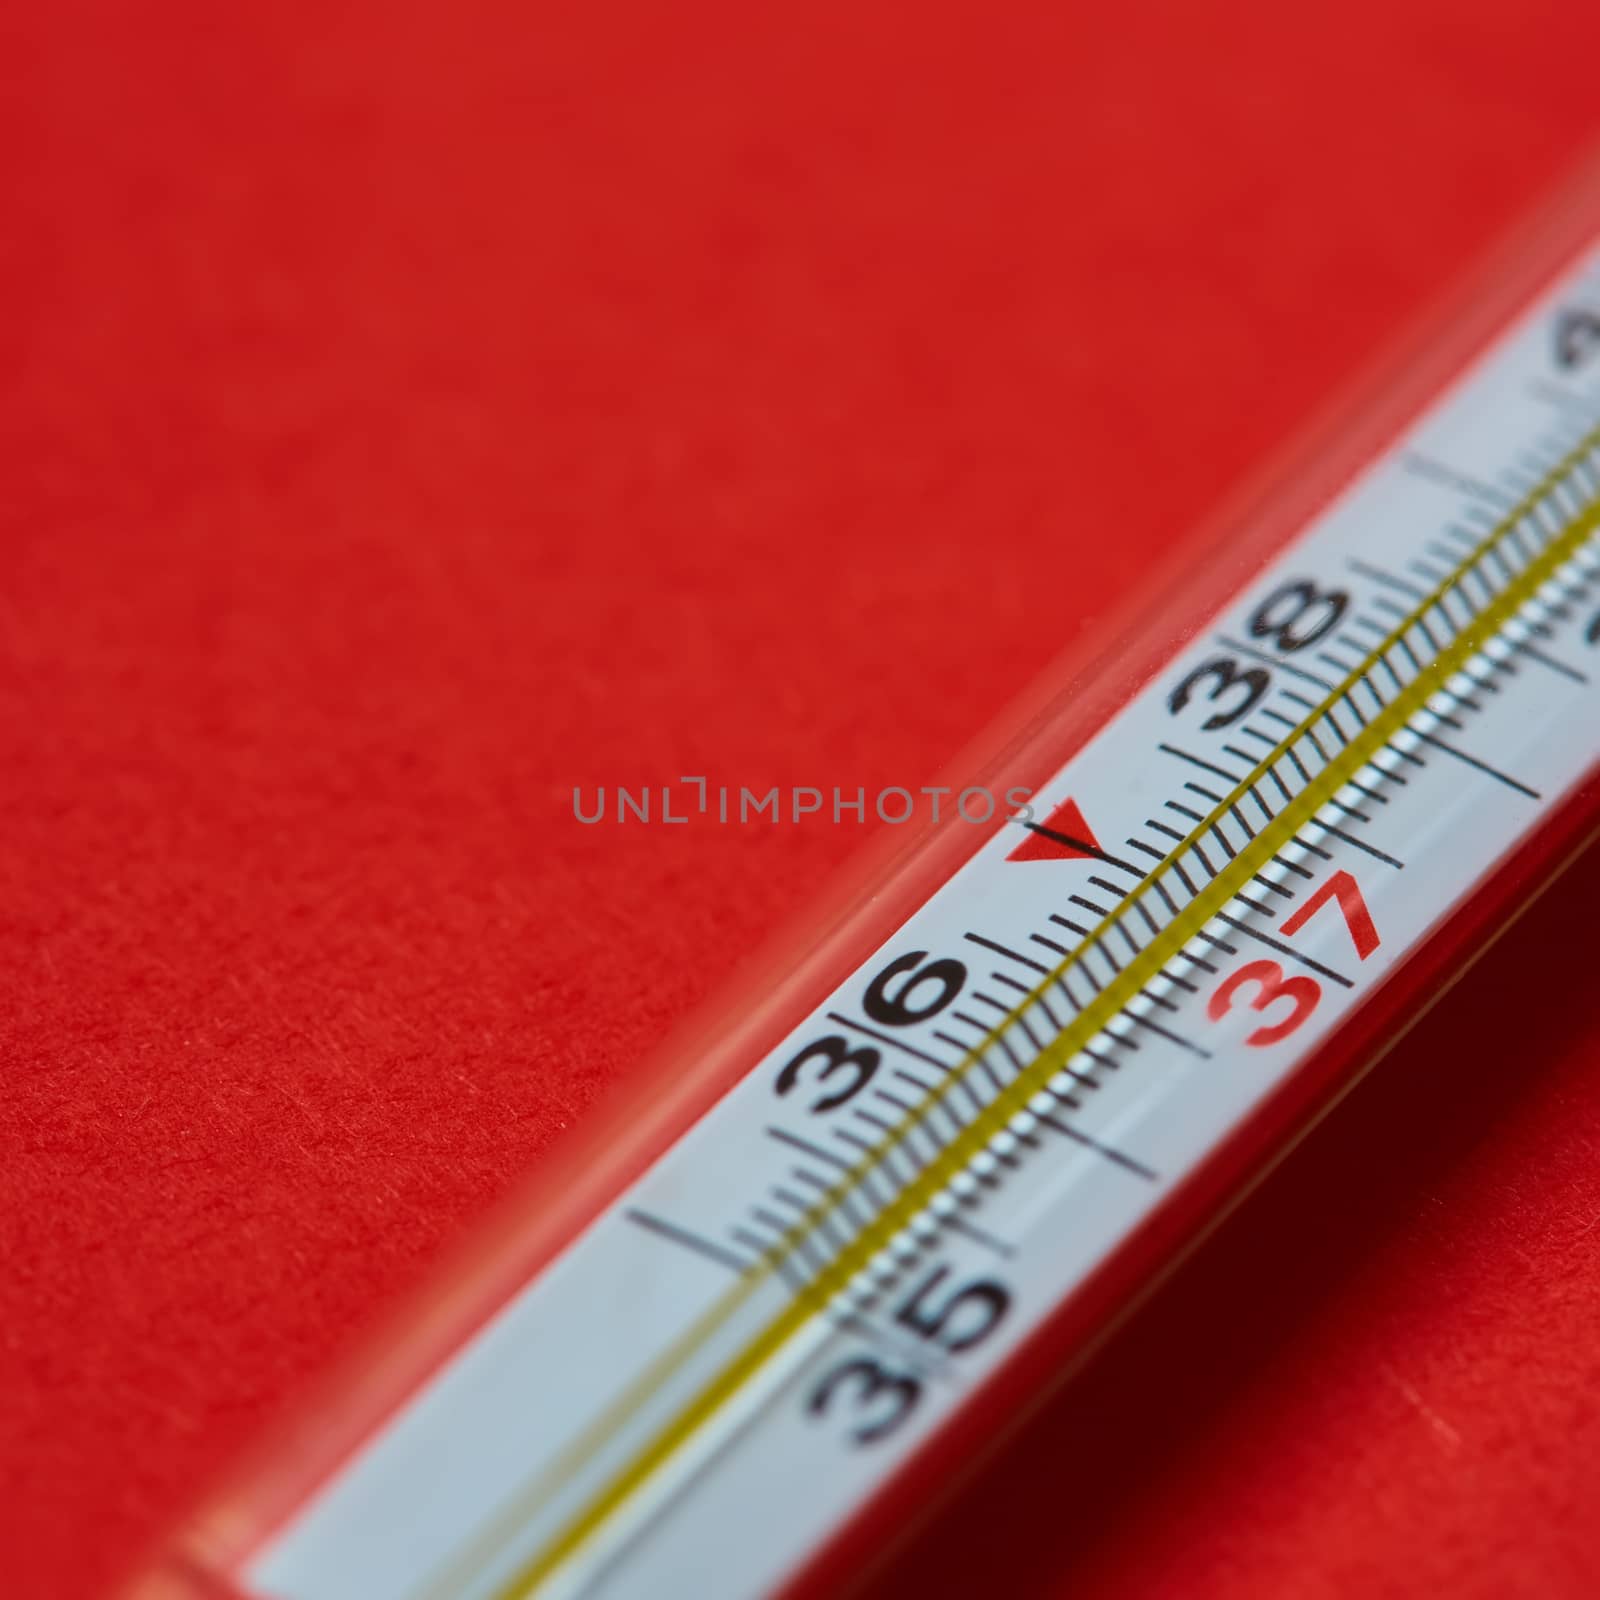 Medical mercury thermometer on red background. Shallow dof